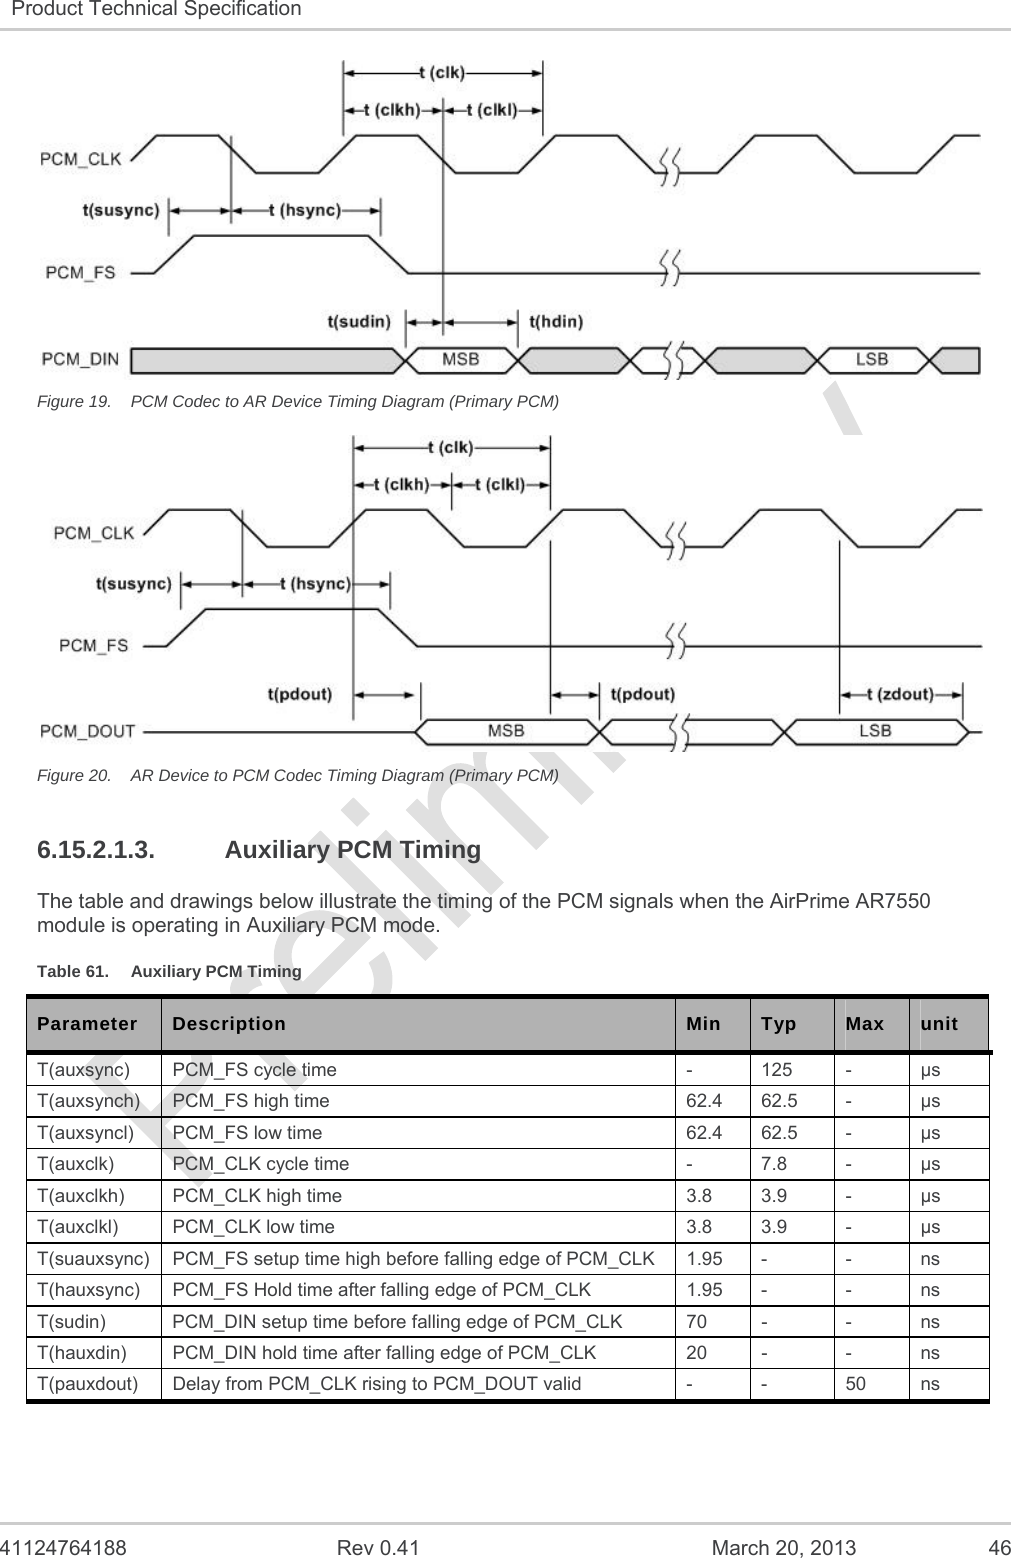   41124764188  Rev 0.41  March 20, 2013  46 Product Technical Specification    Figure 19.  PCM Codec to AR Device Timing Diagram (Primary PCM)  Figure 20.  AR Device to PCM Codec Timing Diagram (Primary PCM) 6.15.2.1.3.  Auxiliary PCM Timing The table and drawings below illustrate the timing of the PCM signals when the AirPrime AR7550 module is operating in Auxiliary PCM mode. Table 61.  Auxiliary PCM Timing Parameter  Description  Min  Typ  Max  unit T(auxsync)  PCM_FS cycle time   -  125  -  µs T(auxsynch)  PCM_FS high time  62.4  62.5  -  µs T(auxsyncl)  PCM_FS low time  62.4  62.5  -  µs T(auxclk)  PCM_CLK cycle time  -  7.8  -  µs T(auxclkh)  PCM_CLK high time  3.8  3.9  -  µs T(auxclkl) PCM_CLK low time  3.8 3.9  -  µs T(suauxsync)   PCM_FS setup time high before falling edge of PCM_CLK  1.95  -  -  ns T(hauxsync)  PCM_FS Hold time after falling edge of PCM_CLK  1.95  -  -  ns T(sudin)  PCM_DIN setup time before falling edge of PCM_CLK  70  -  -  ns T(hauxdin)  PCM_DIN hold time after falling edge of PCM_CLK  20  -  -  ns T(pauxdout)  Delay from PCM_CLK rising to PCM_DOUT valid  -  -  50  ns 